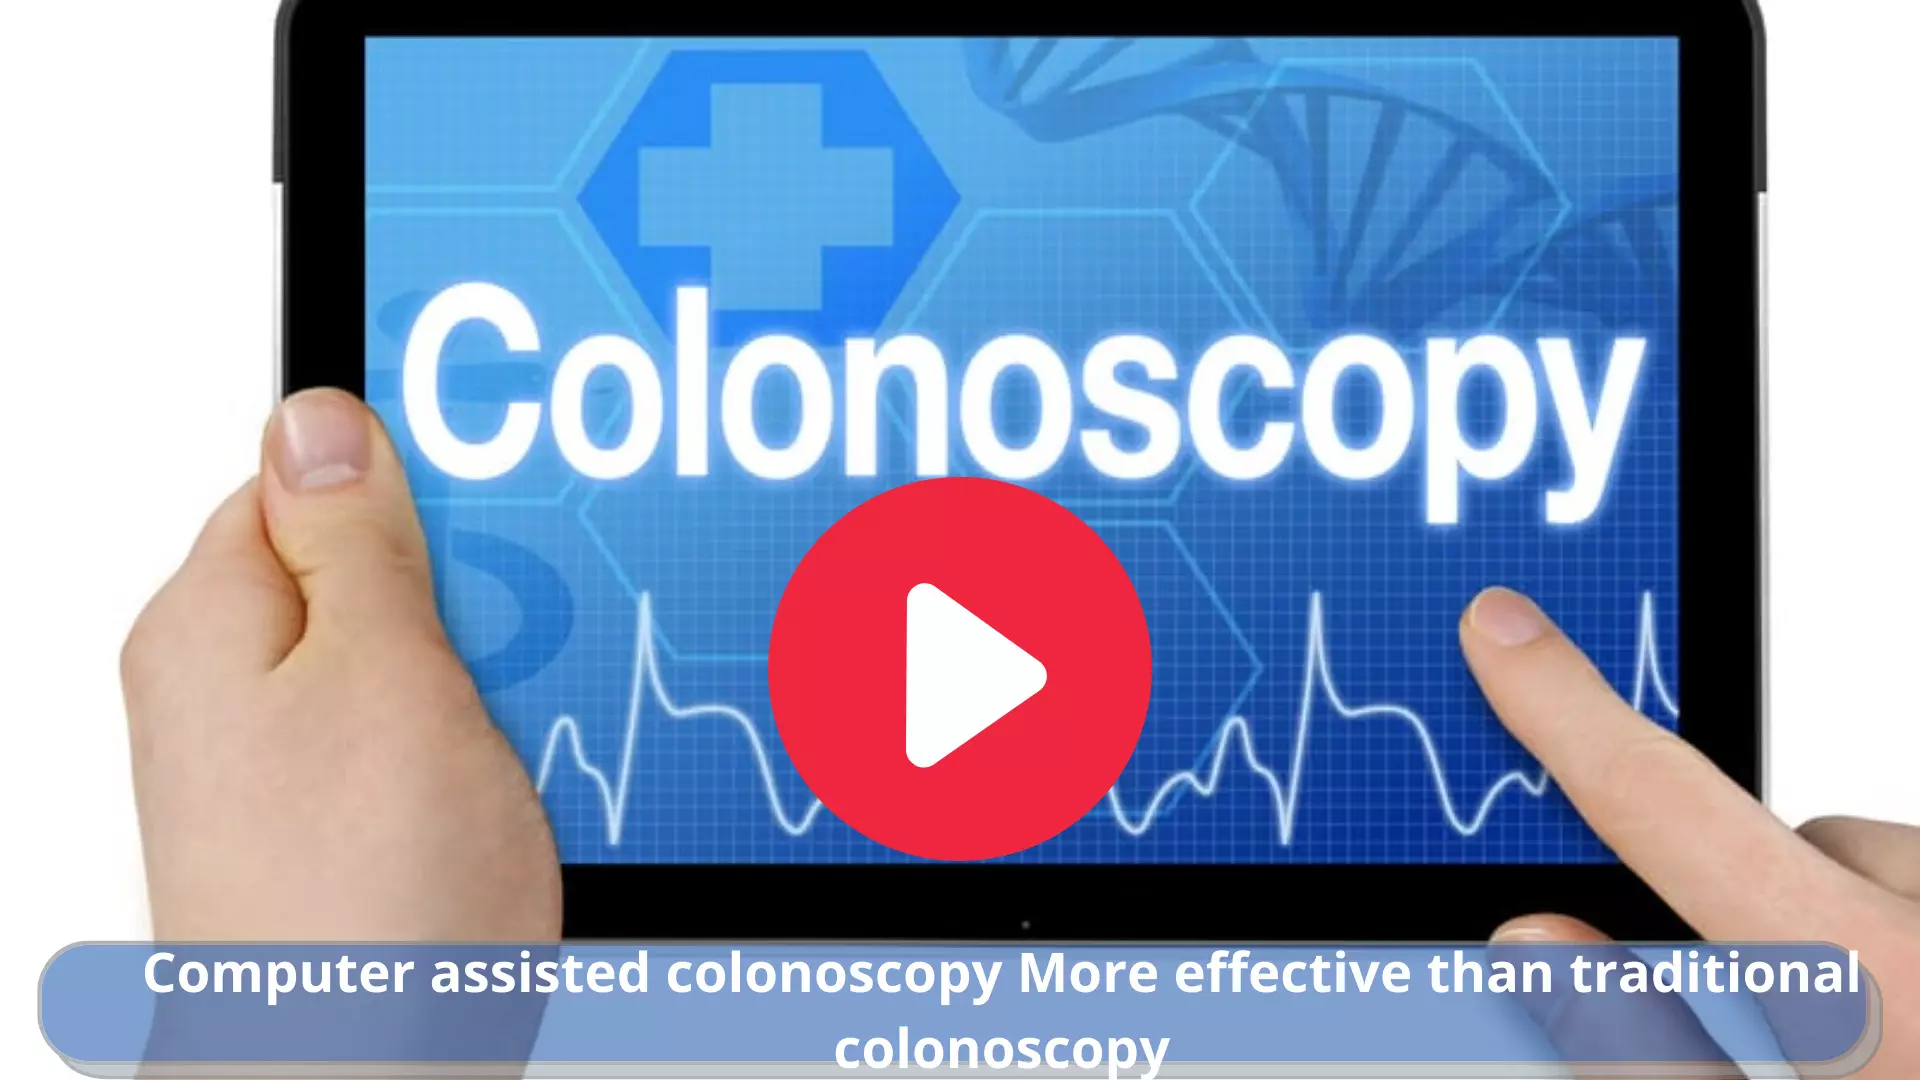 Computer assisted colonoscopy More effective than traditional colonoscopy